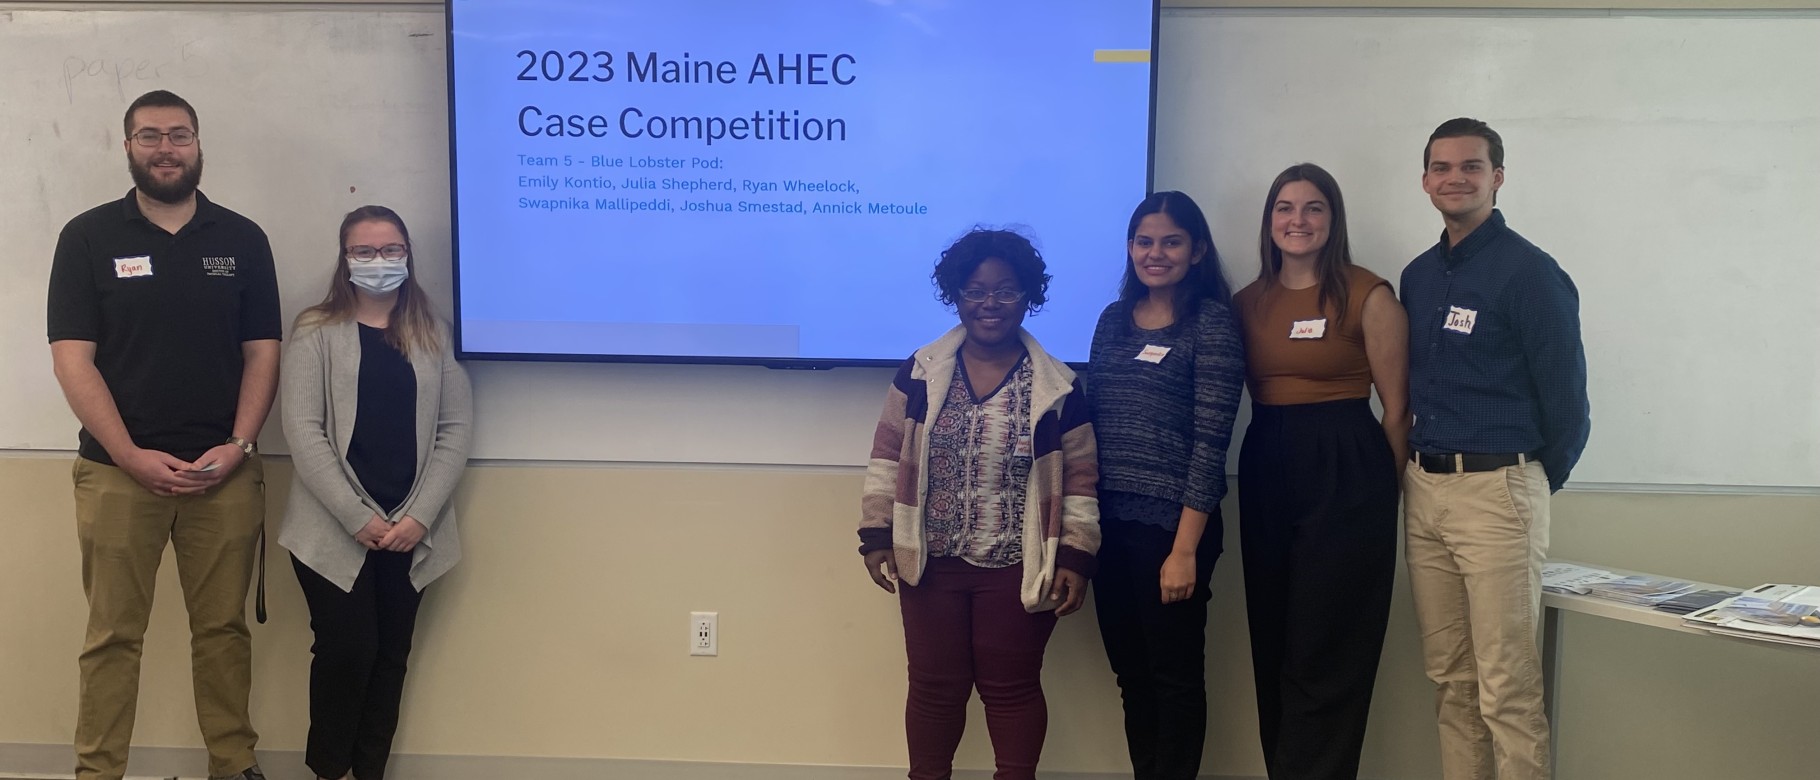 Two people are shown to the left of a screen and four people to the right. On the screen, the words “2023 Maine AHEC Case Competition” are displayed.